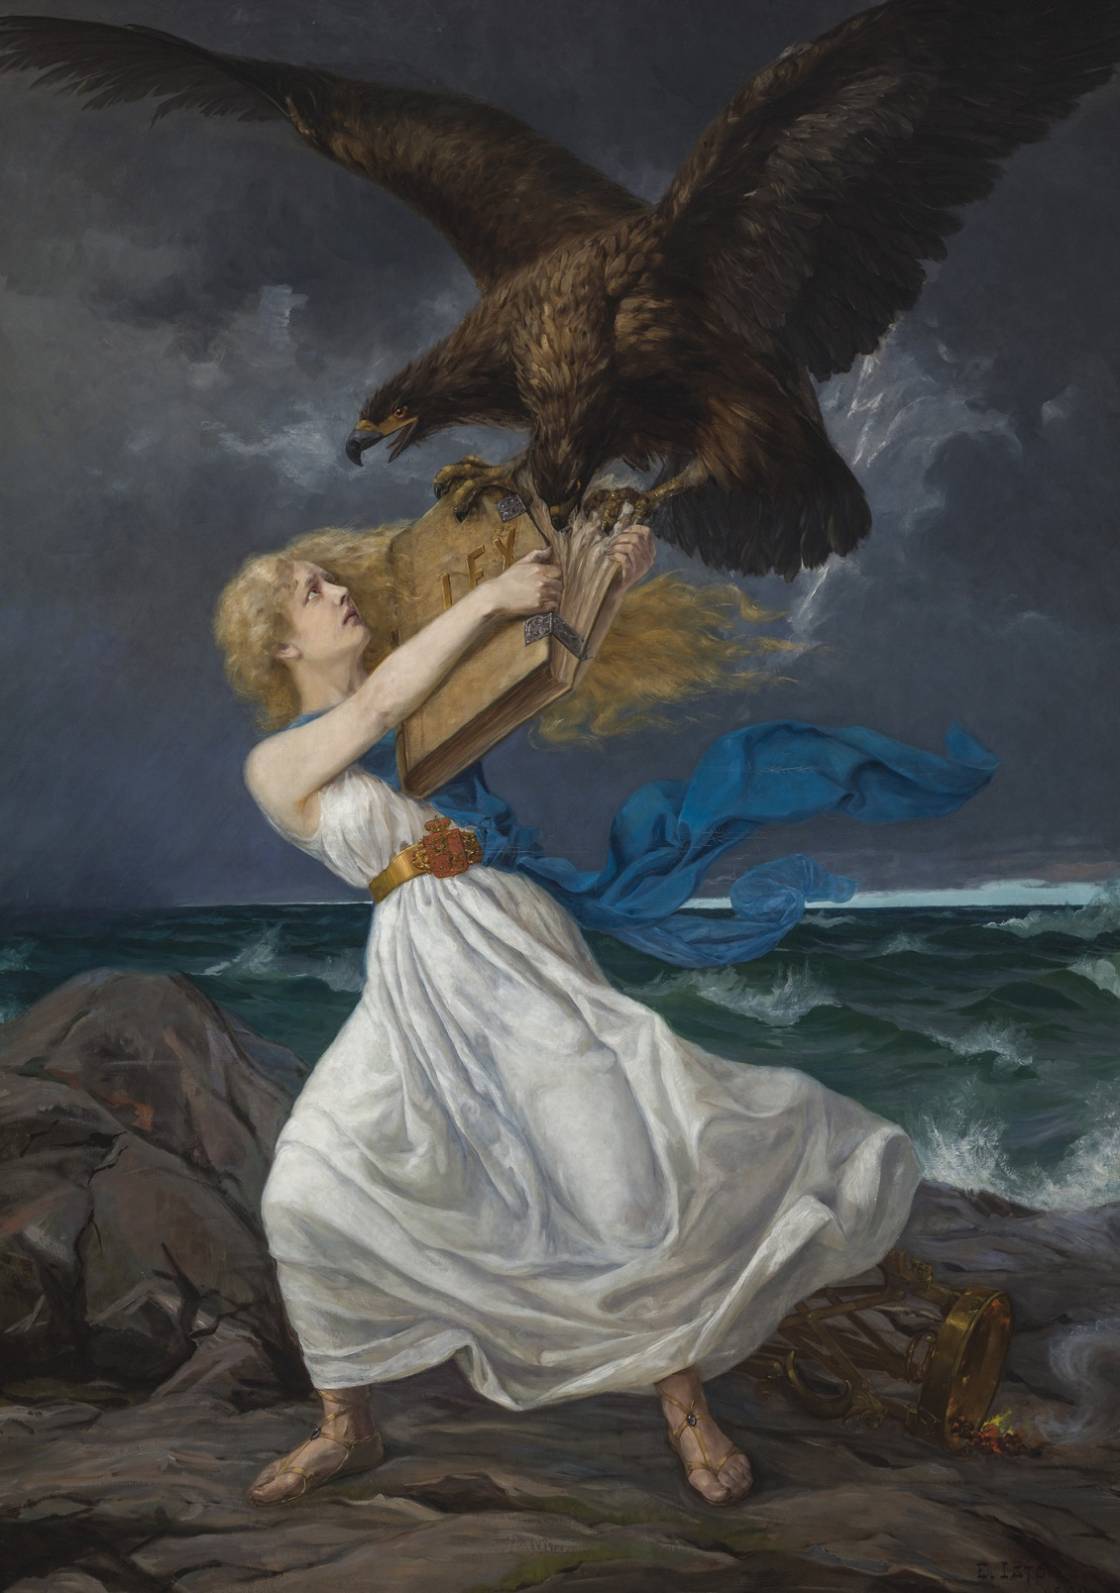 Edvard Isto, Attack, 1899, oil on canvas,  National Museum of Finland, Helsinki